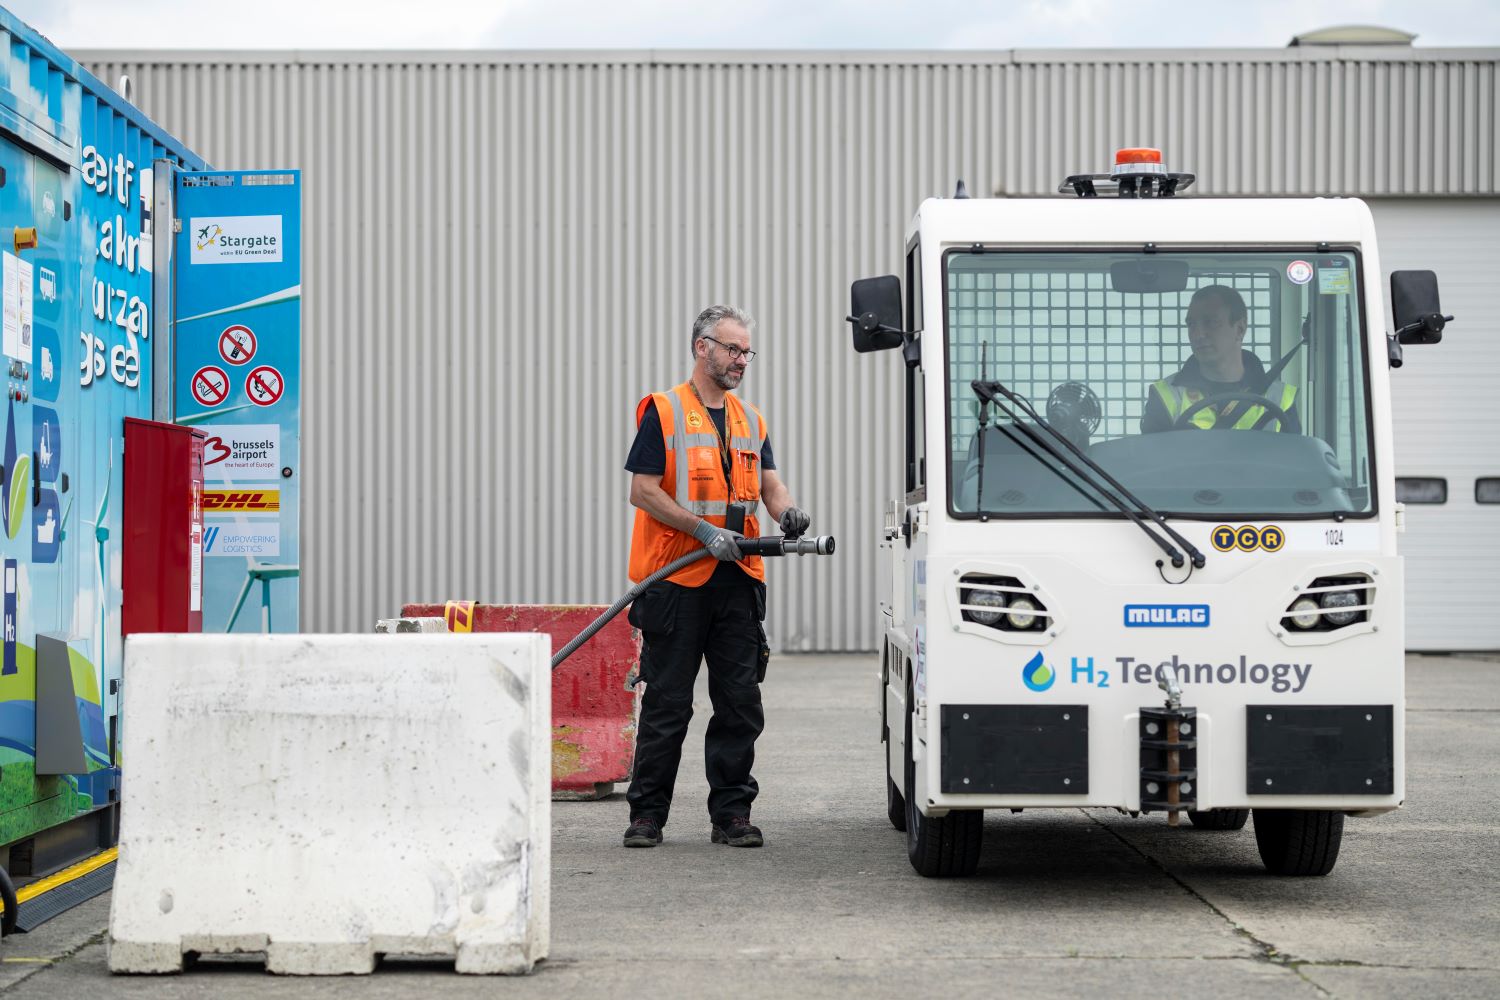 Brussels Airport and Stargate EU Green Deal project partners VIL and DHL are currently testing a hydrogen refuelling station and a hydrogen-powered Mulag